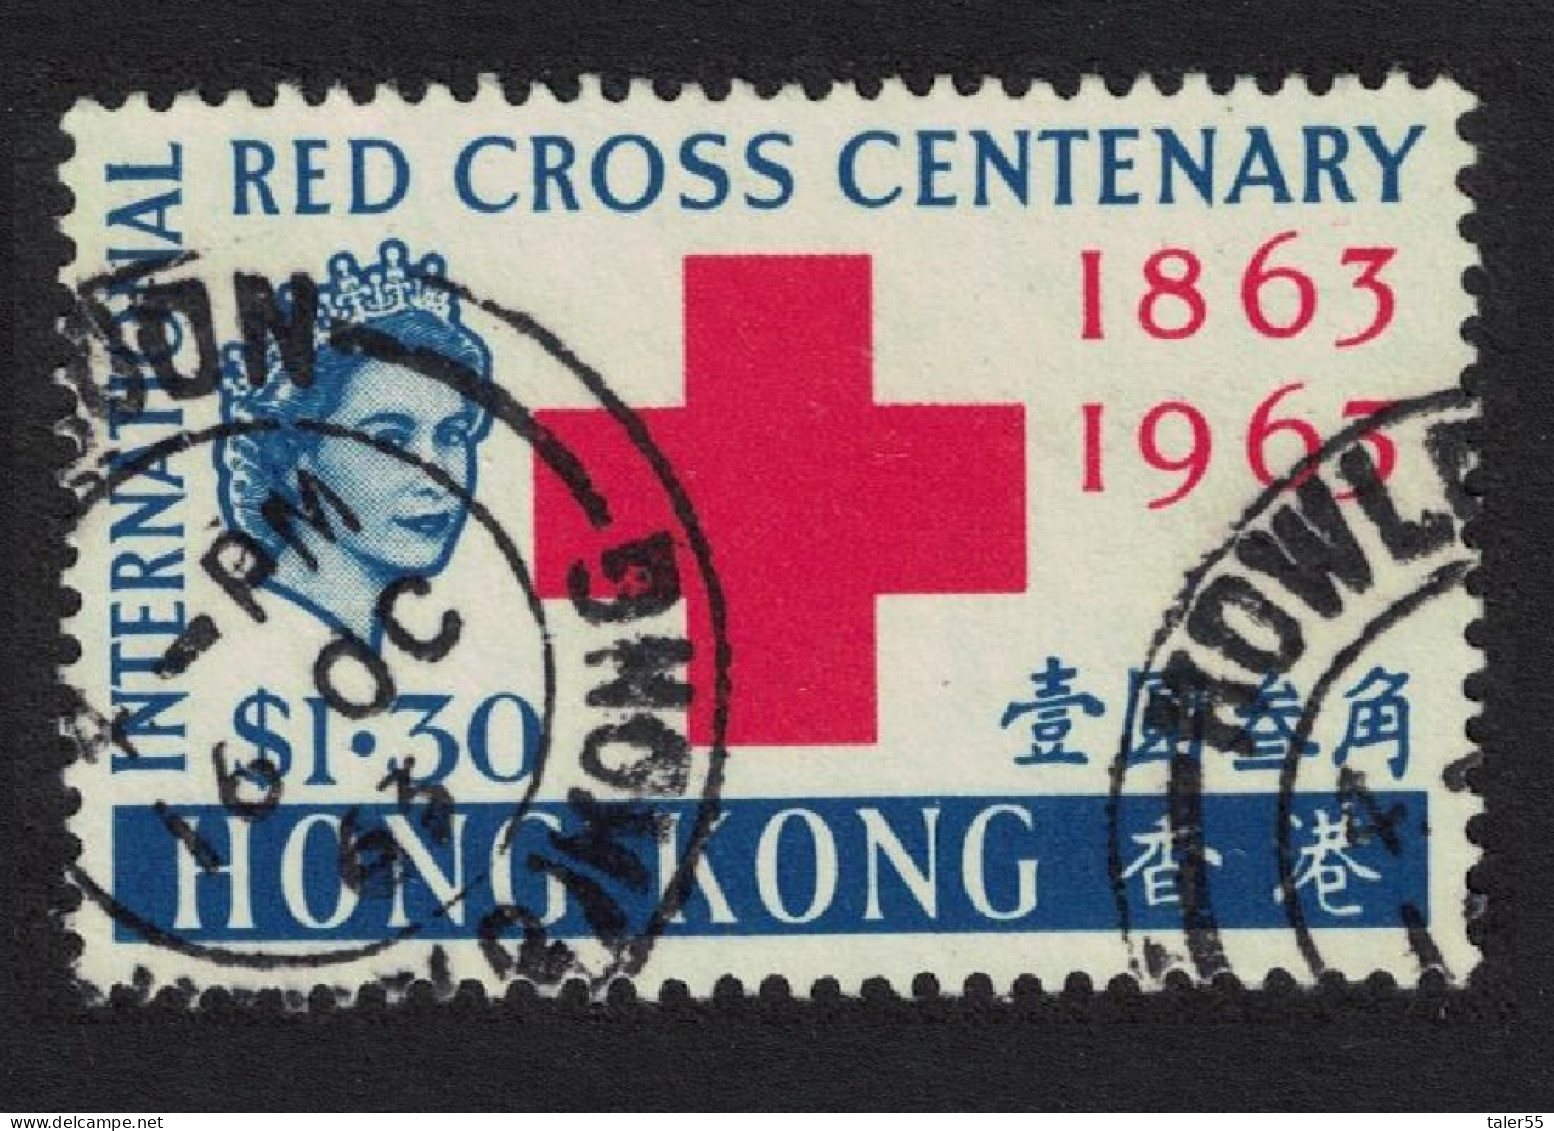 Hong Kong Centenary Of Red Cross $1.30 T2 1963 Canc SG#213 - Used Stamps